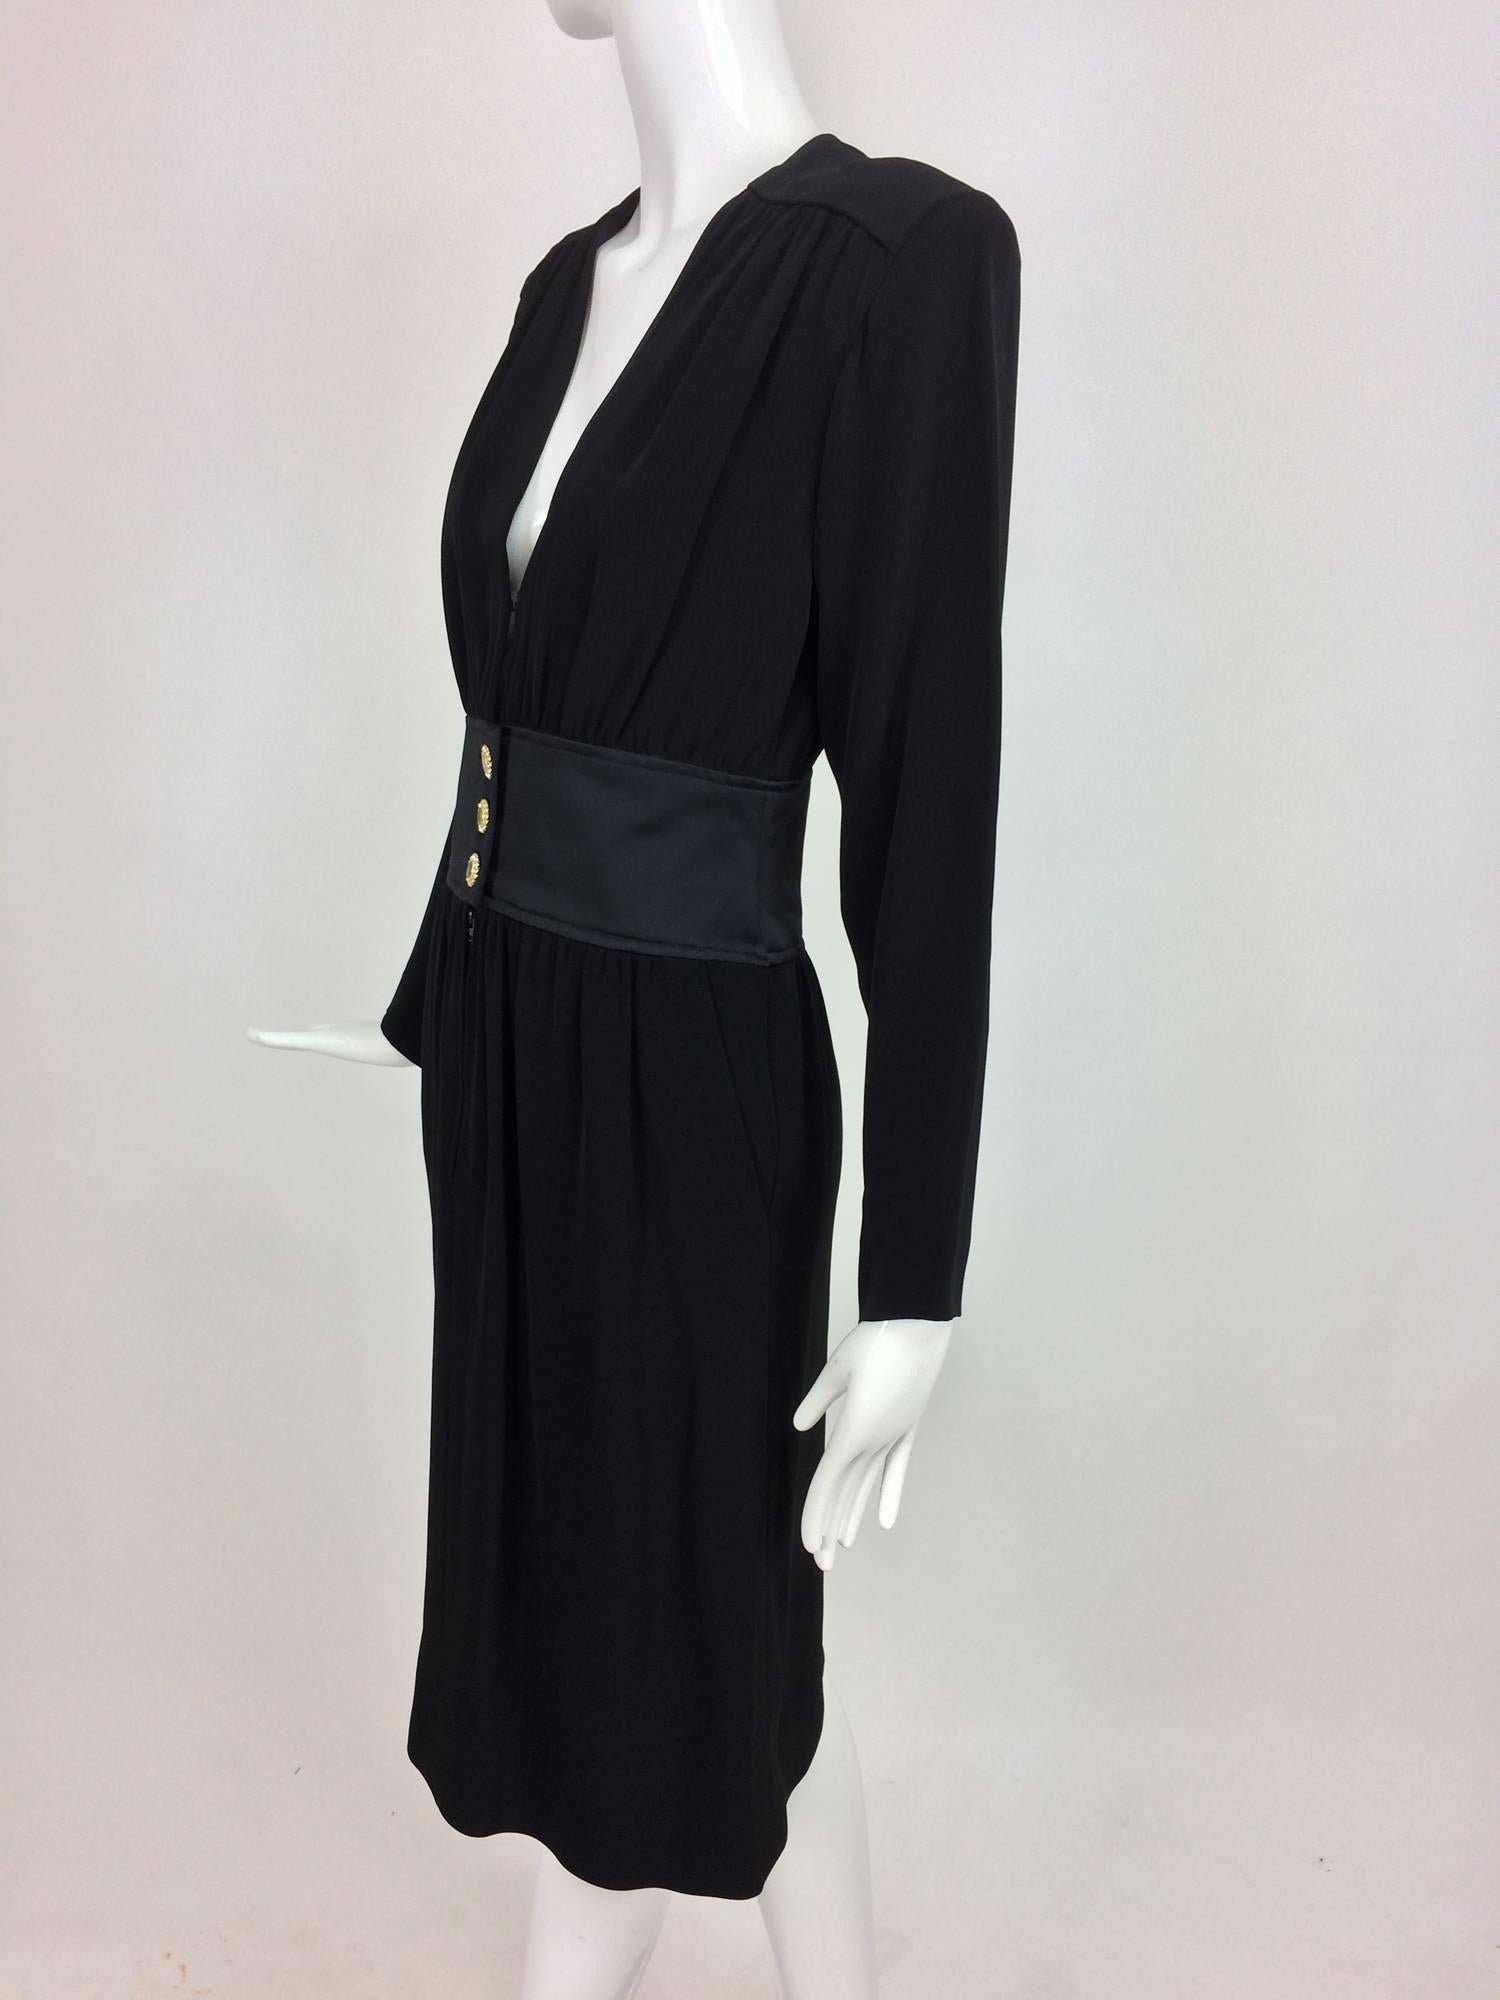 Vintage Yves St Laurent black crepe and satin cocktail dress 1990s...This chic classic dress has a V neckline front, long sleeves with padded shoulders, jewel buttons  at the shaped black satin waist...The skirt is slightly gathered and falls just